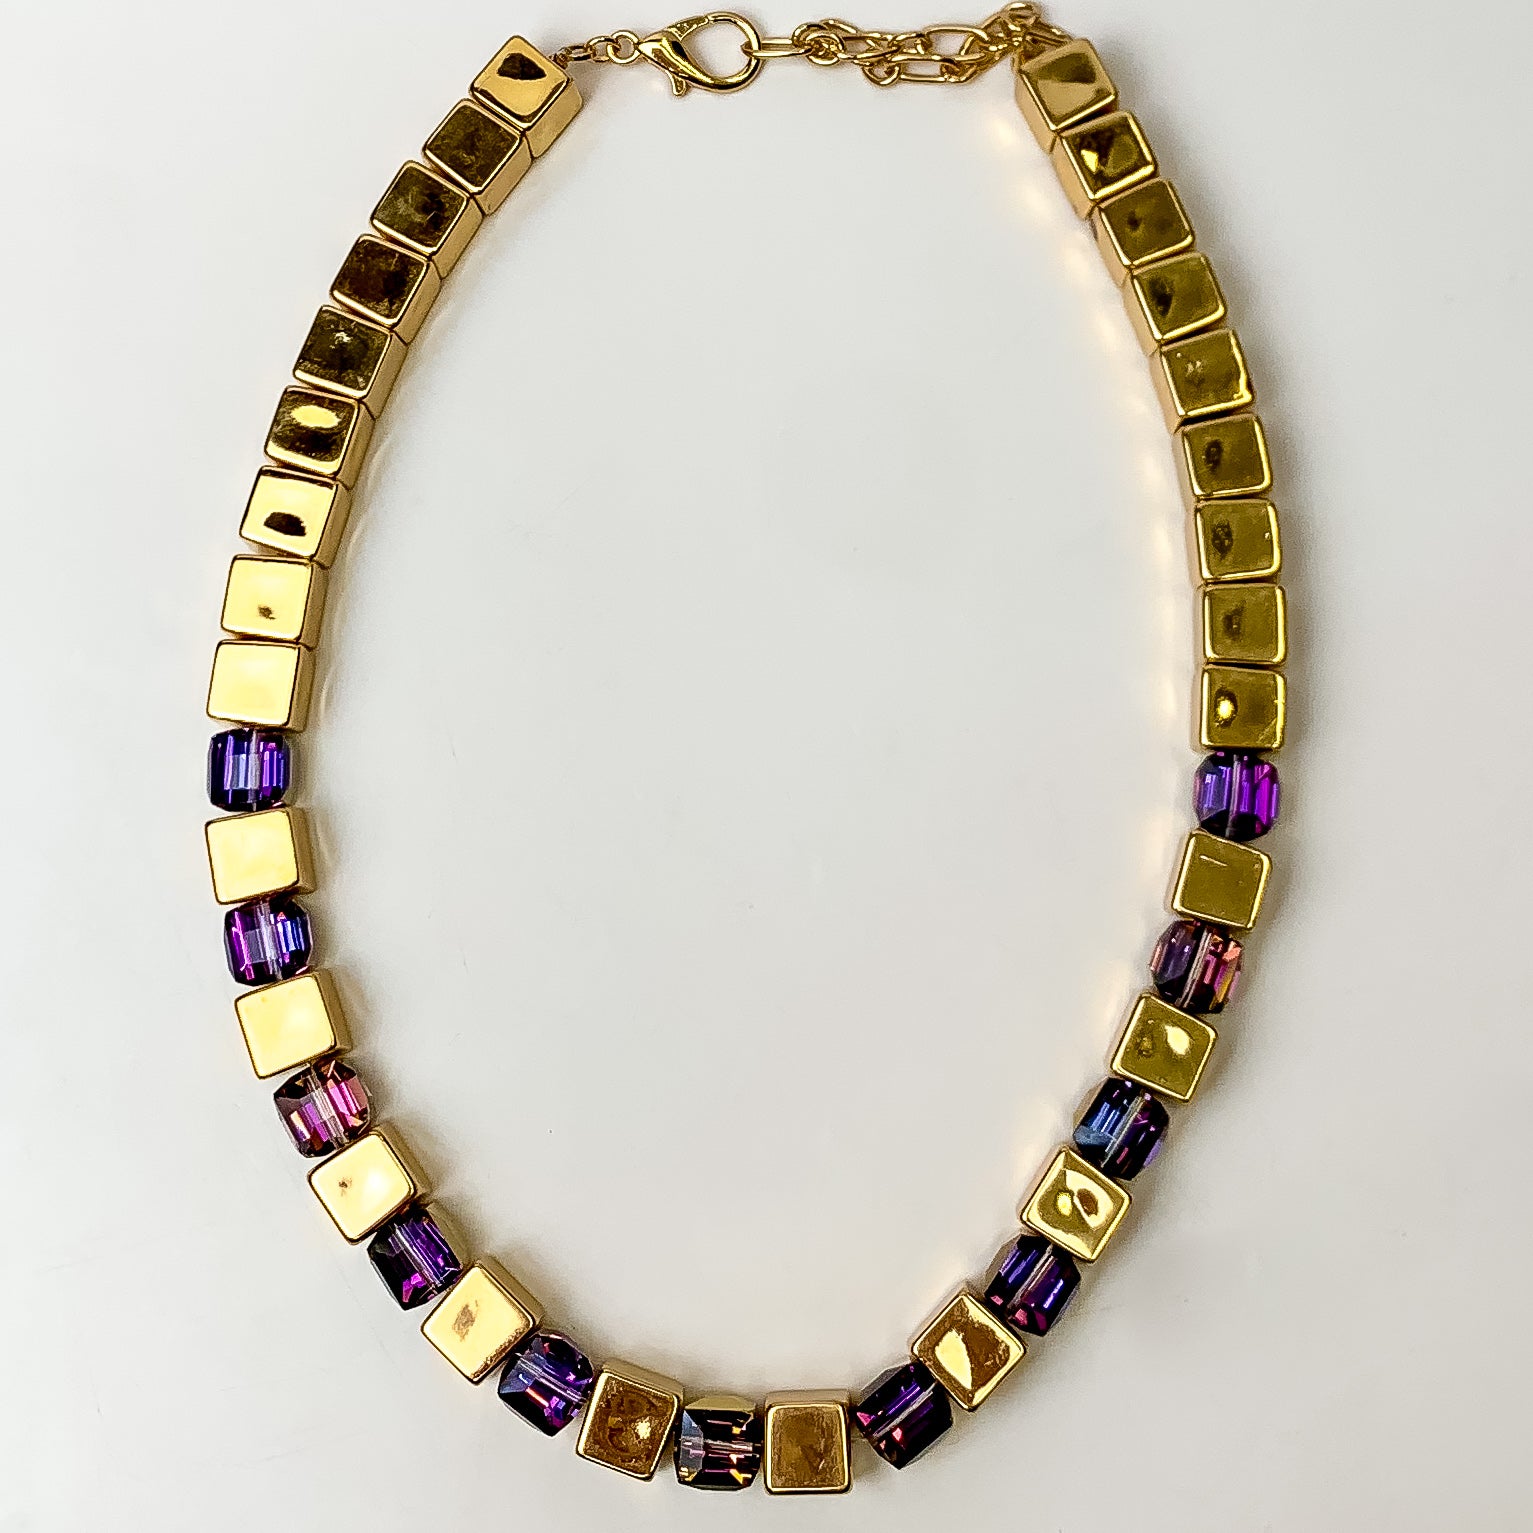 This Fashionably Late Gold Tone Cubed Necklace in Purple is pictured on a white background.